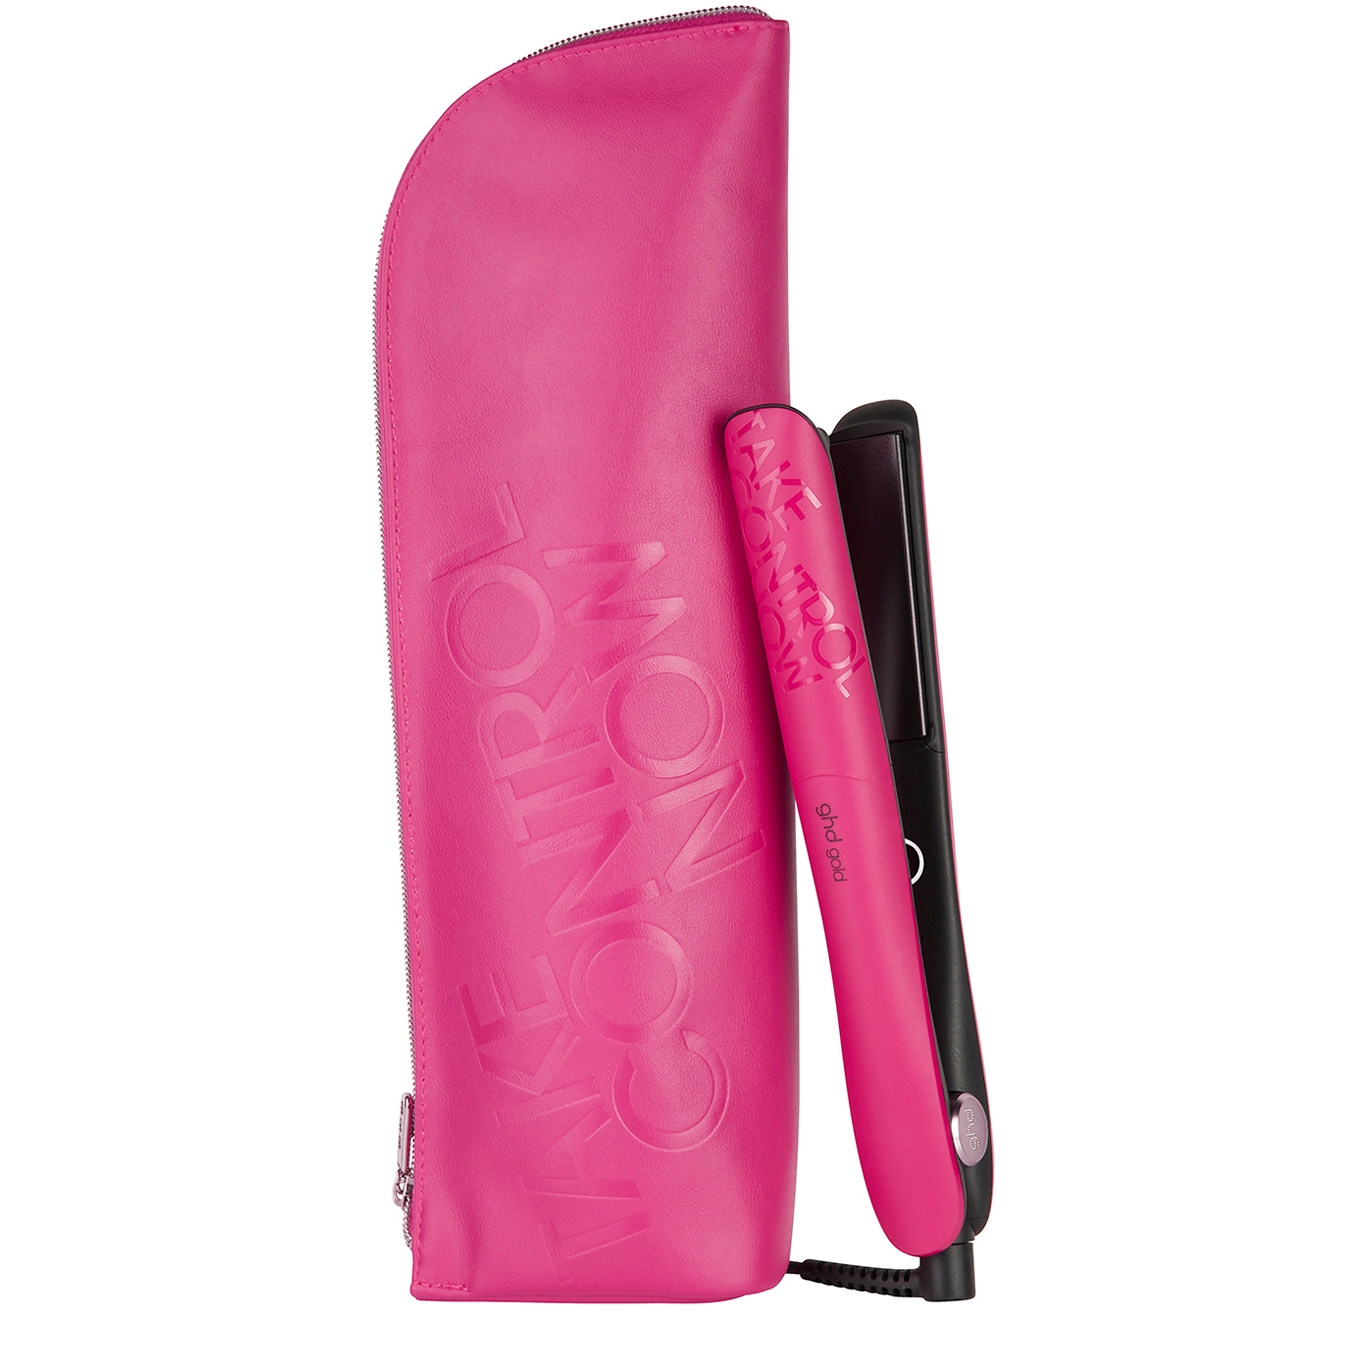 Ghd Gold Hair Straightener - Pink Charity Edition